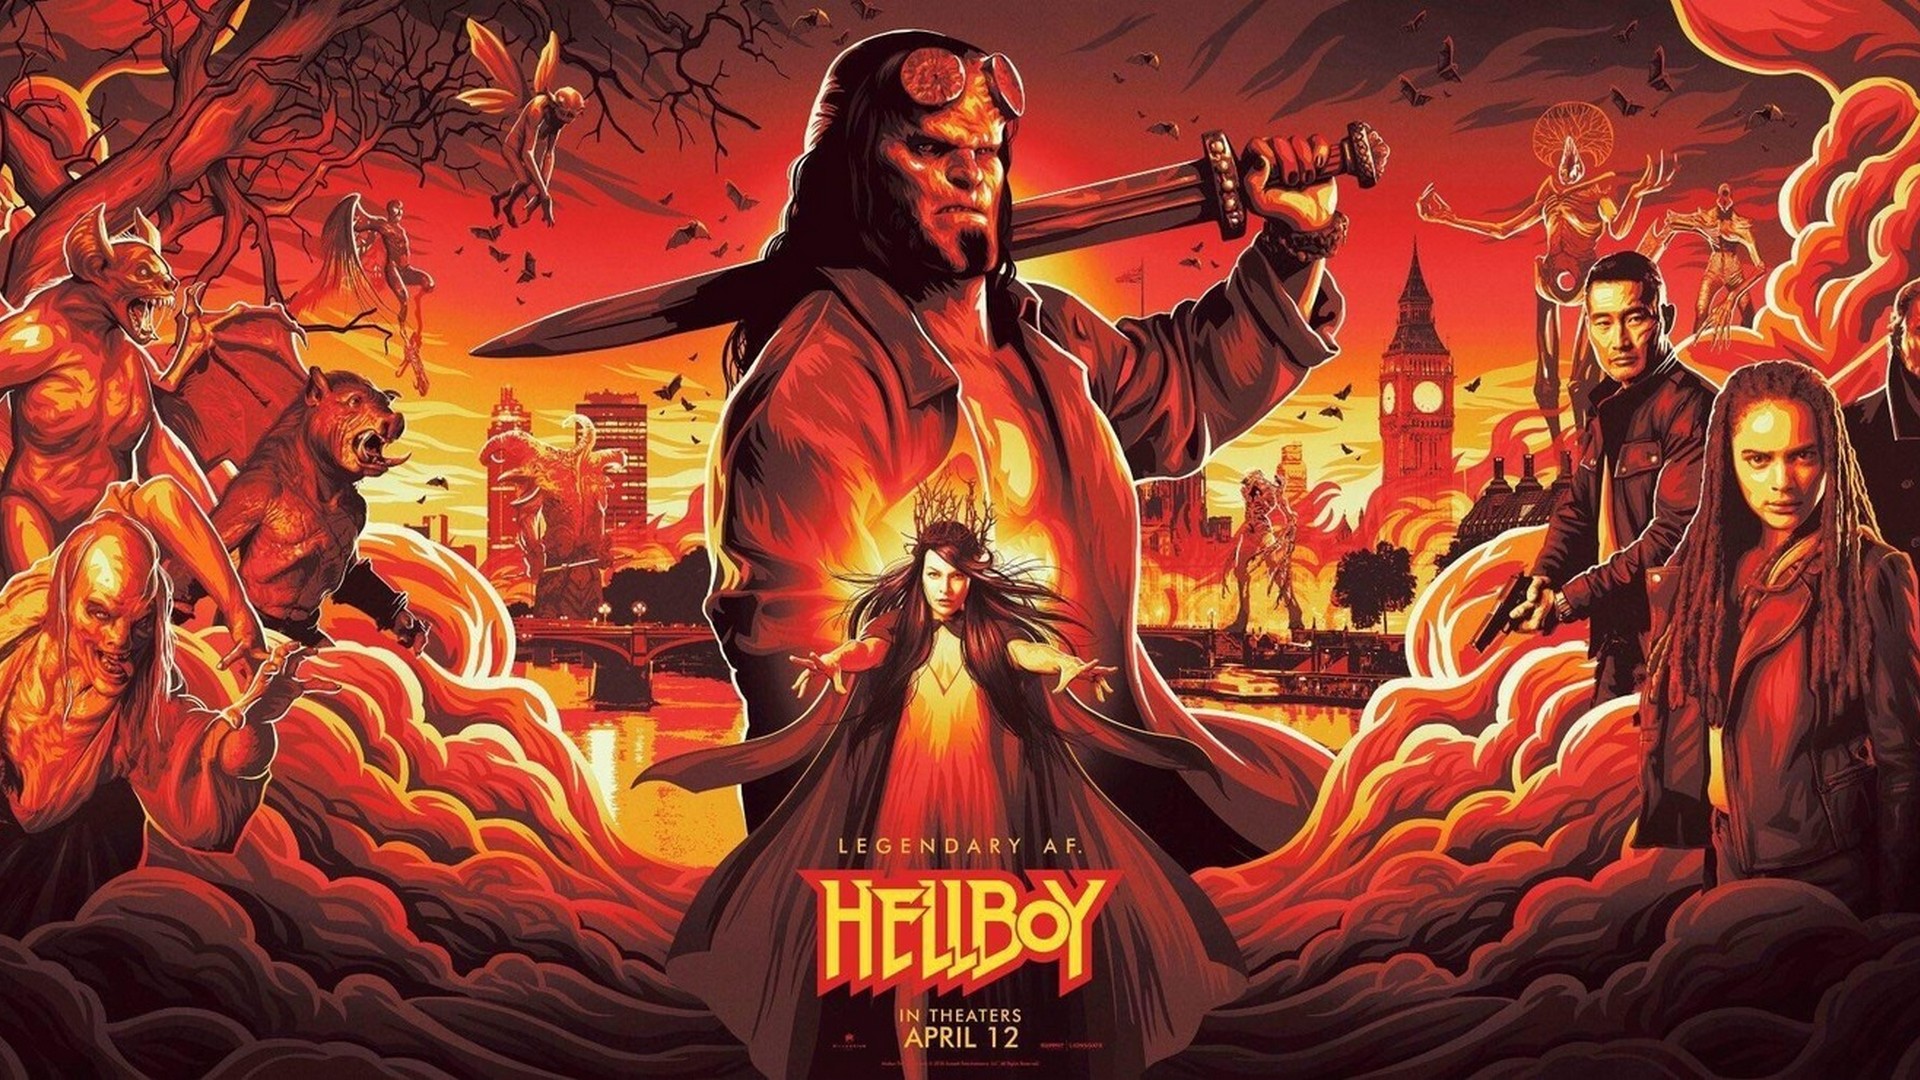 Hellboy 2019 Wallpaper HD With high-resolution 1920X1080 pixel. You can use this wallpaper for your Desktop Computer Backgrounds, Mac Wallpapers, Android Lock screen or iPhone Screensavers and another smartphone device